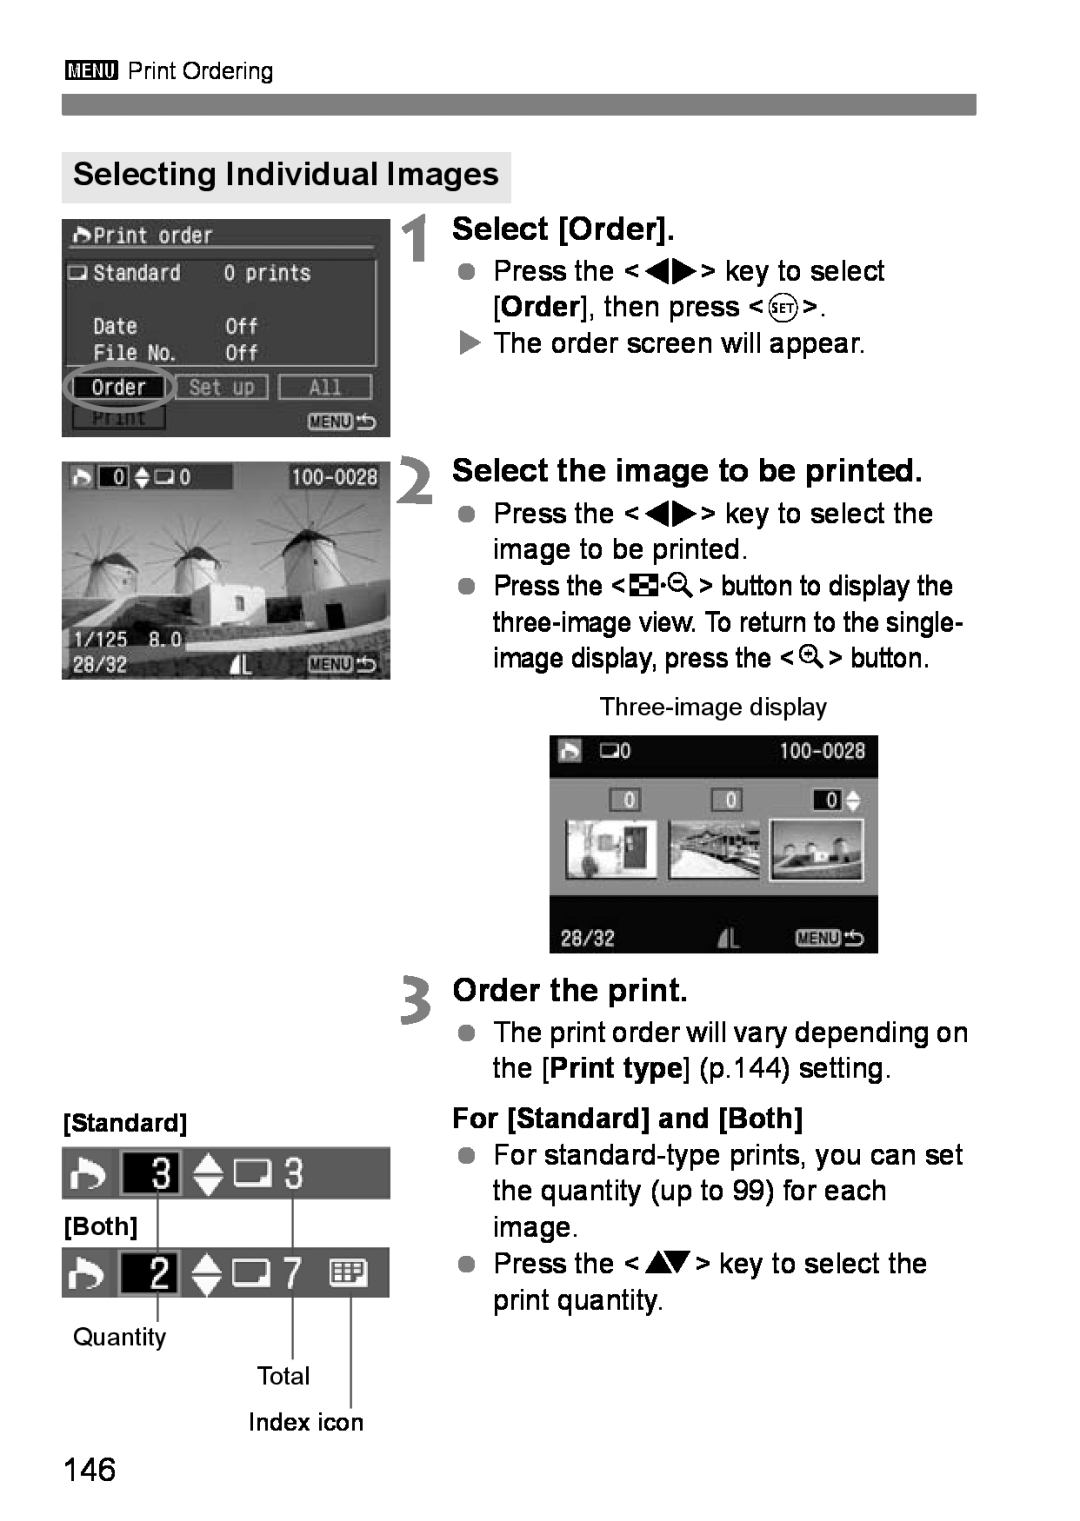 Canon EOS DIGITAL REBEL XTI Selecting Individual Images, Select Order, Order the print, Select the image to be printed 